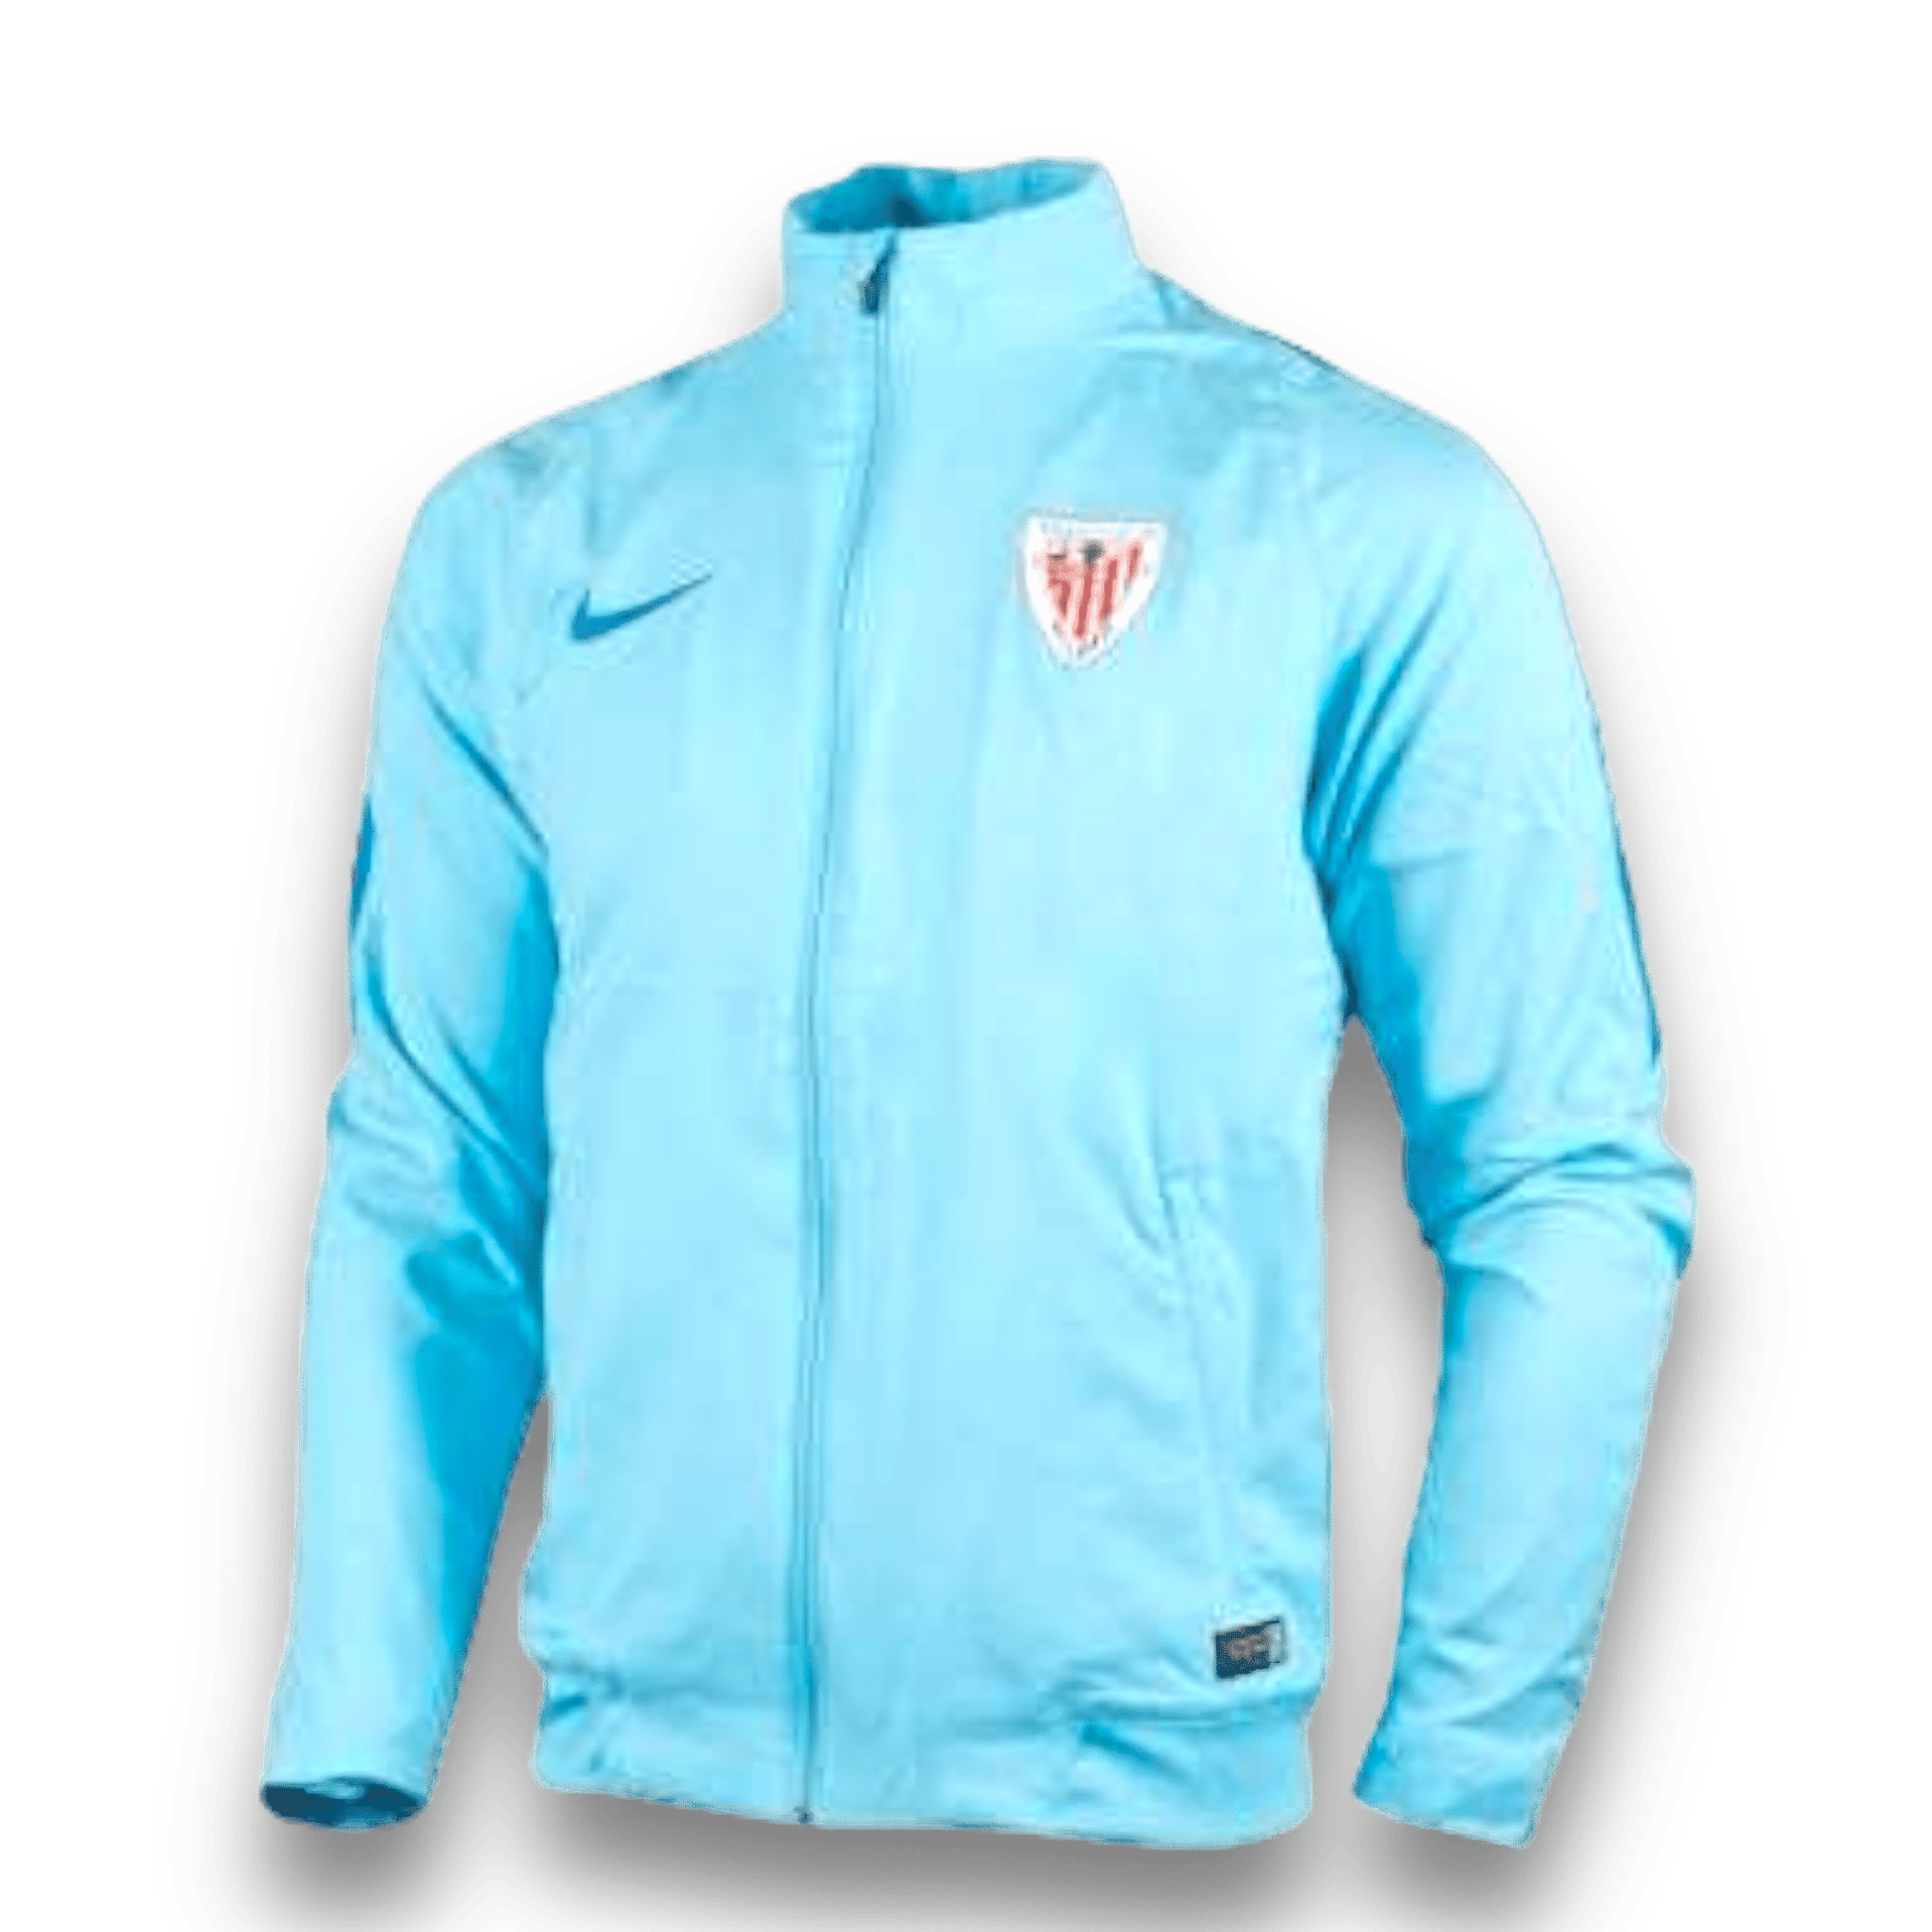 Nike athletic Bilbao Track Jacket - Apparel For Less